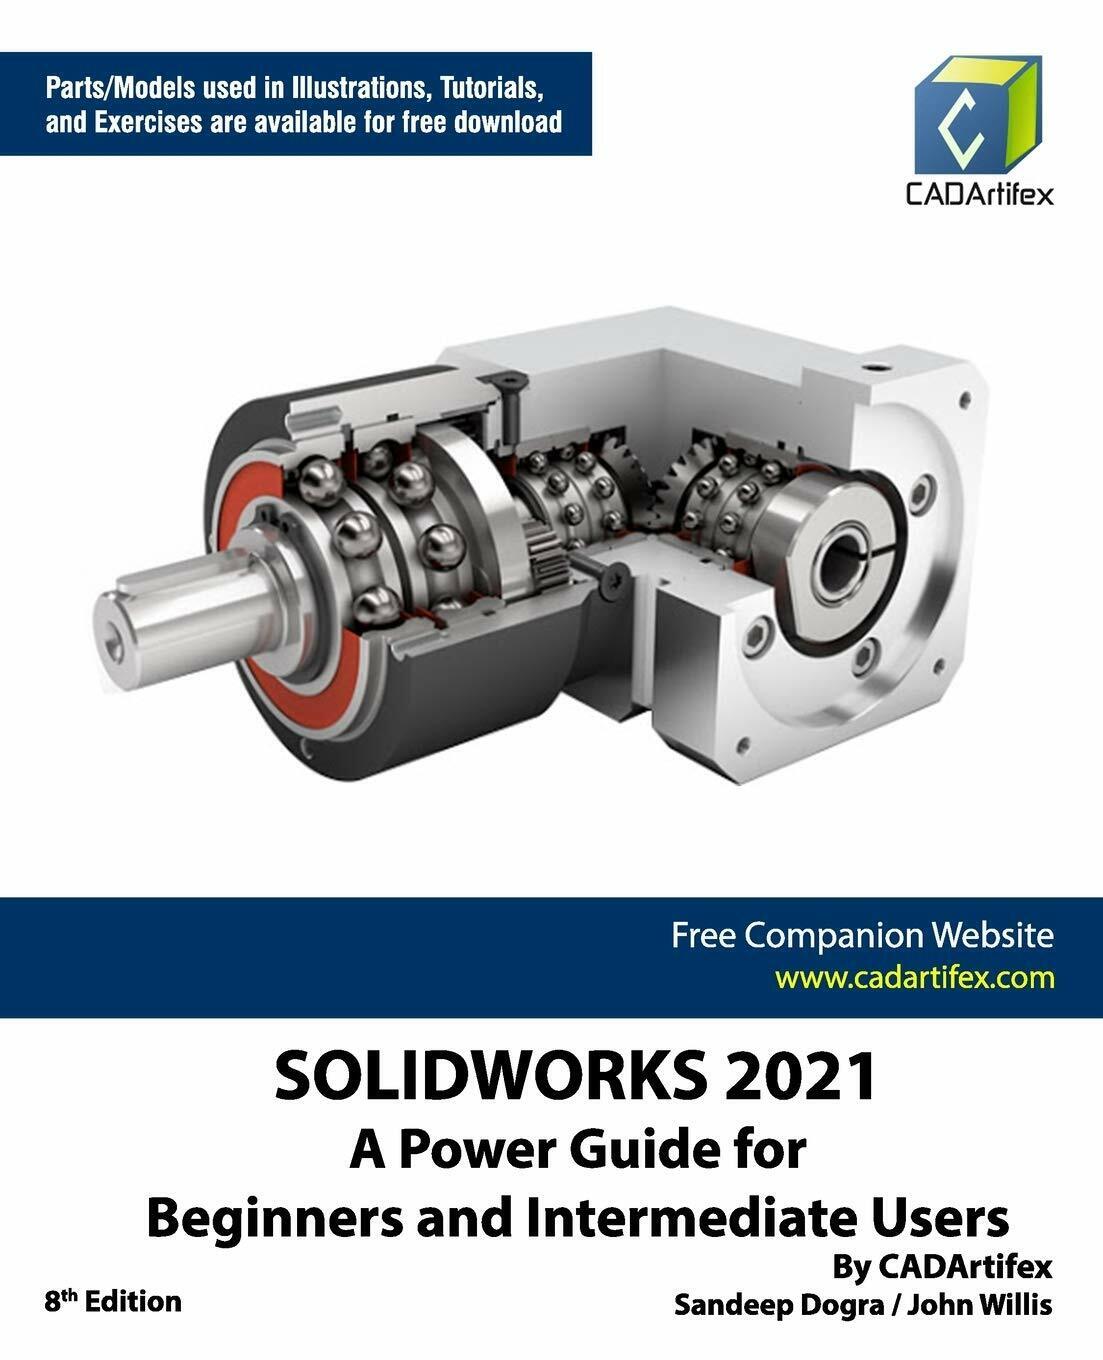 Solidworks 2021 A Power Guide for Beginners and Intermediate Users di John Willi